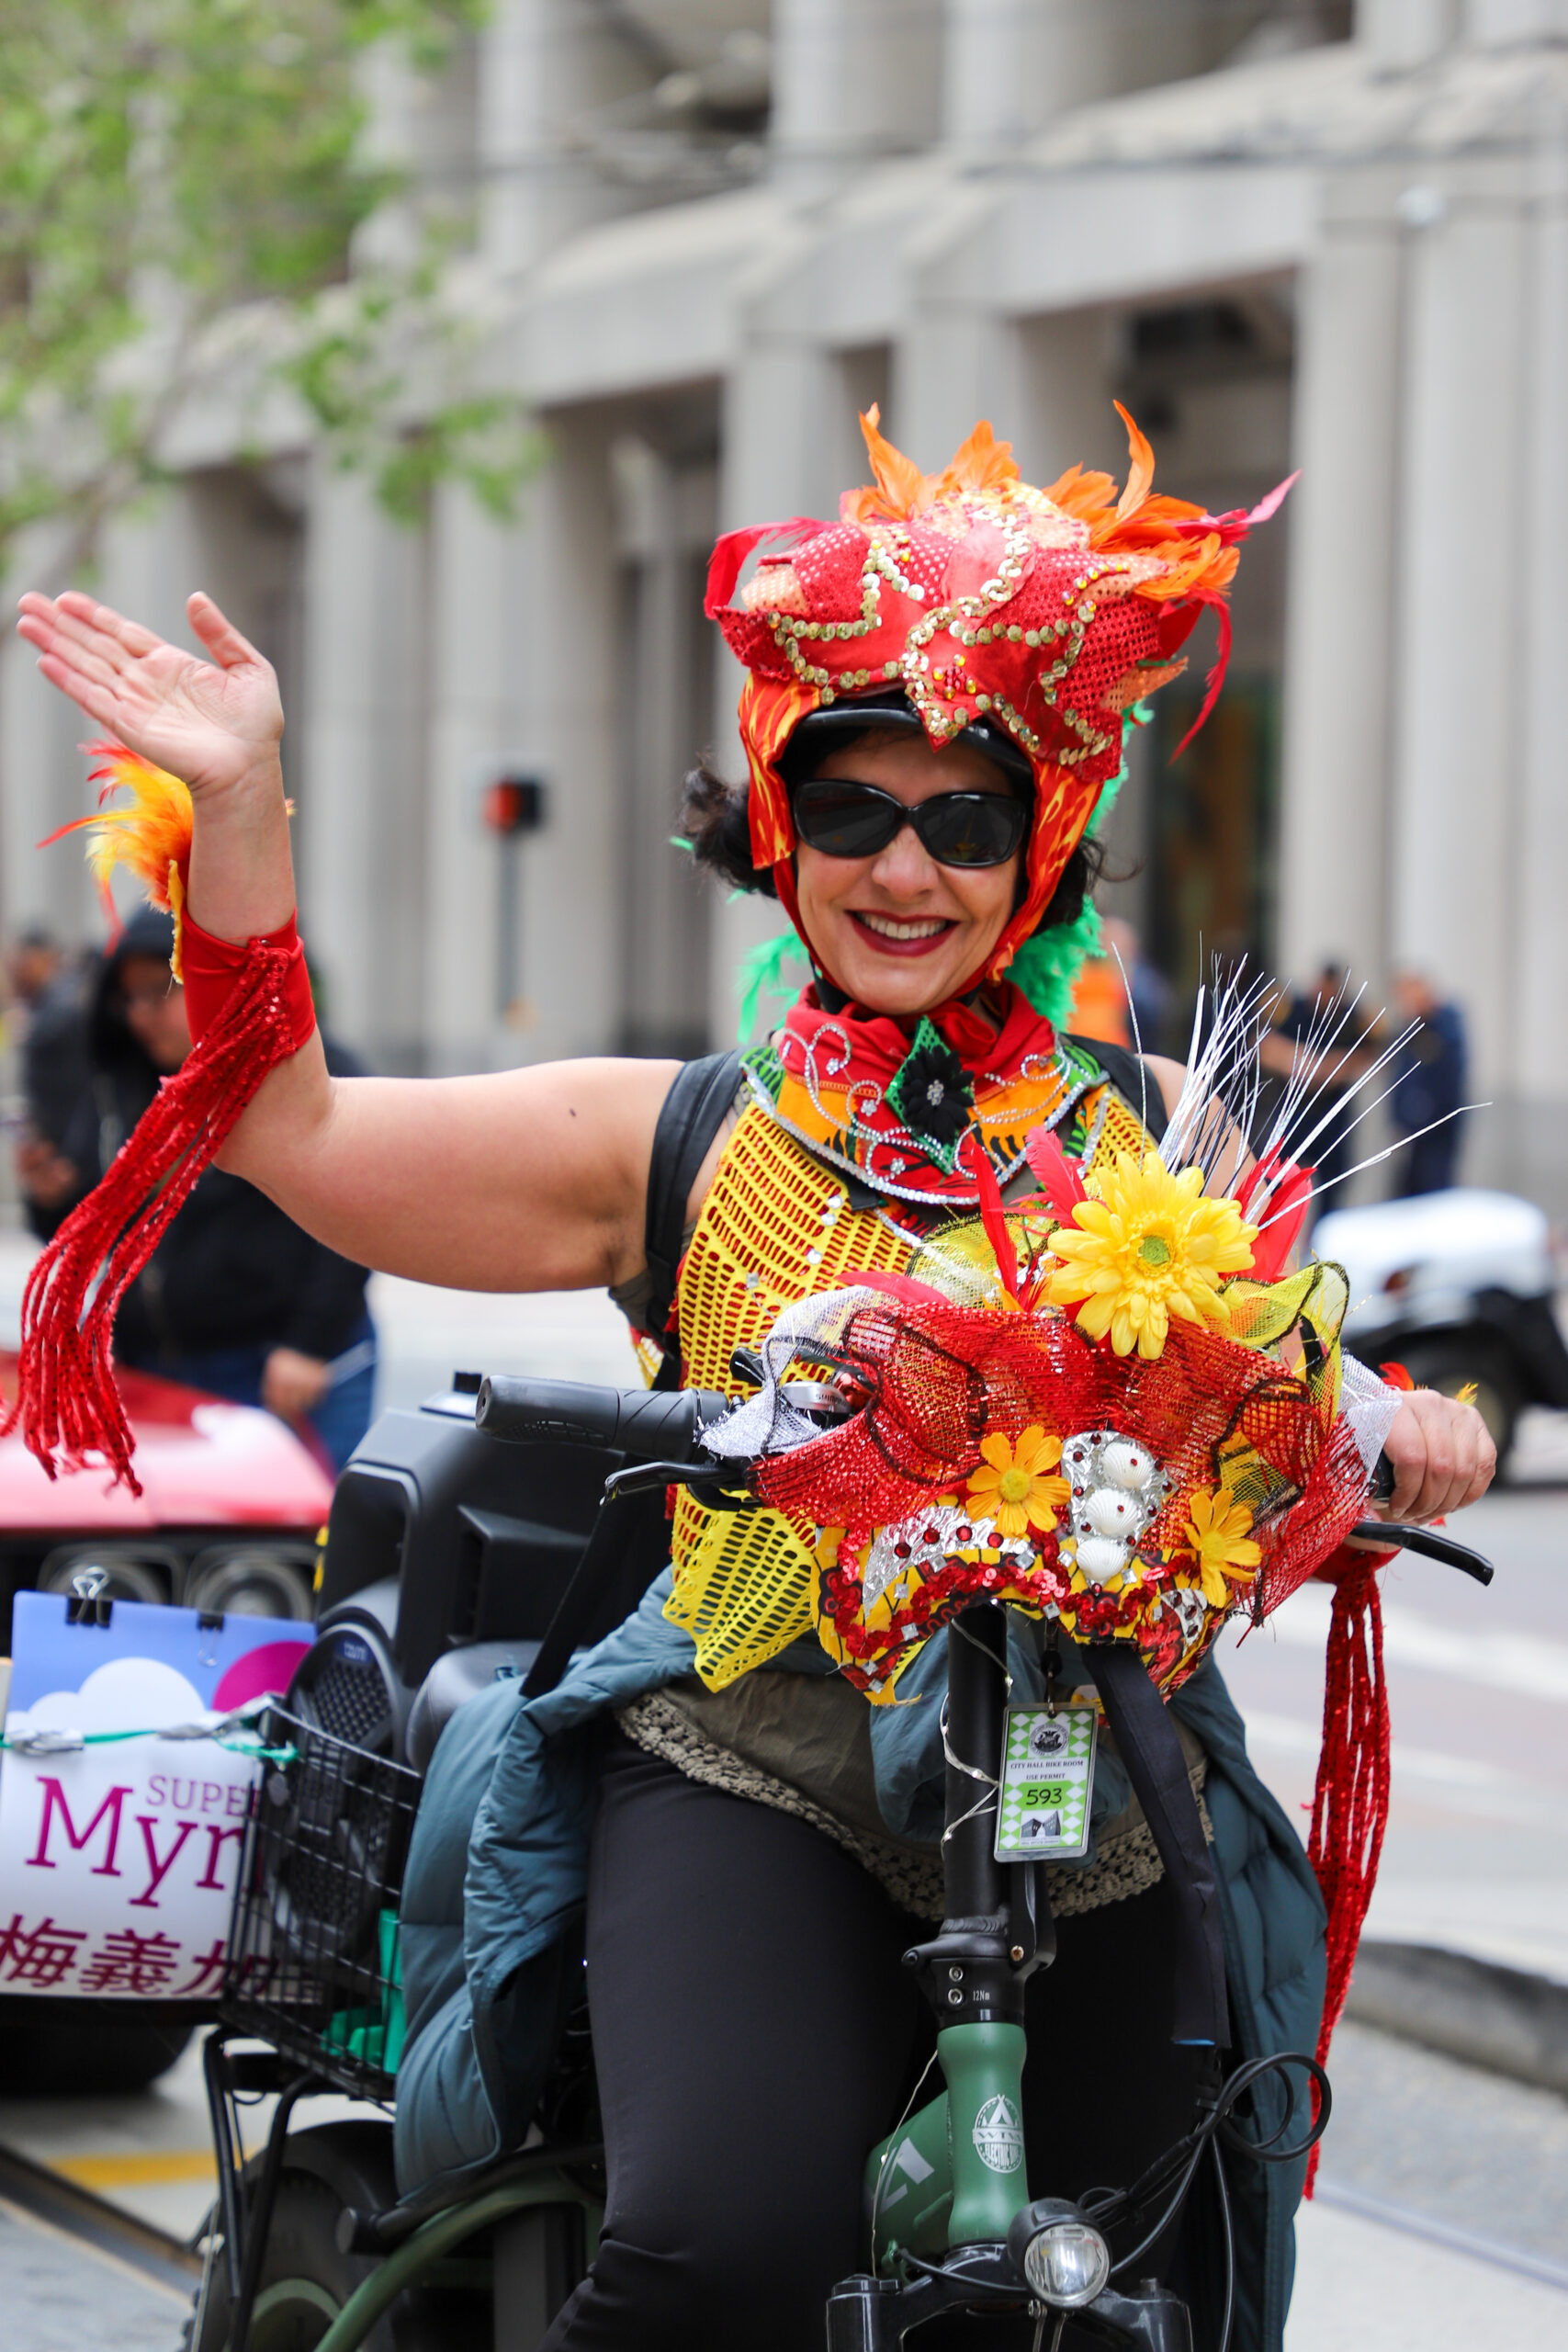 A person in a brightly colored costume rides a scooter, waving at the camera.